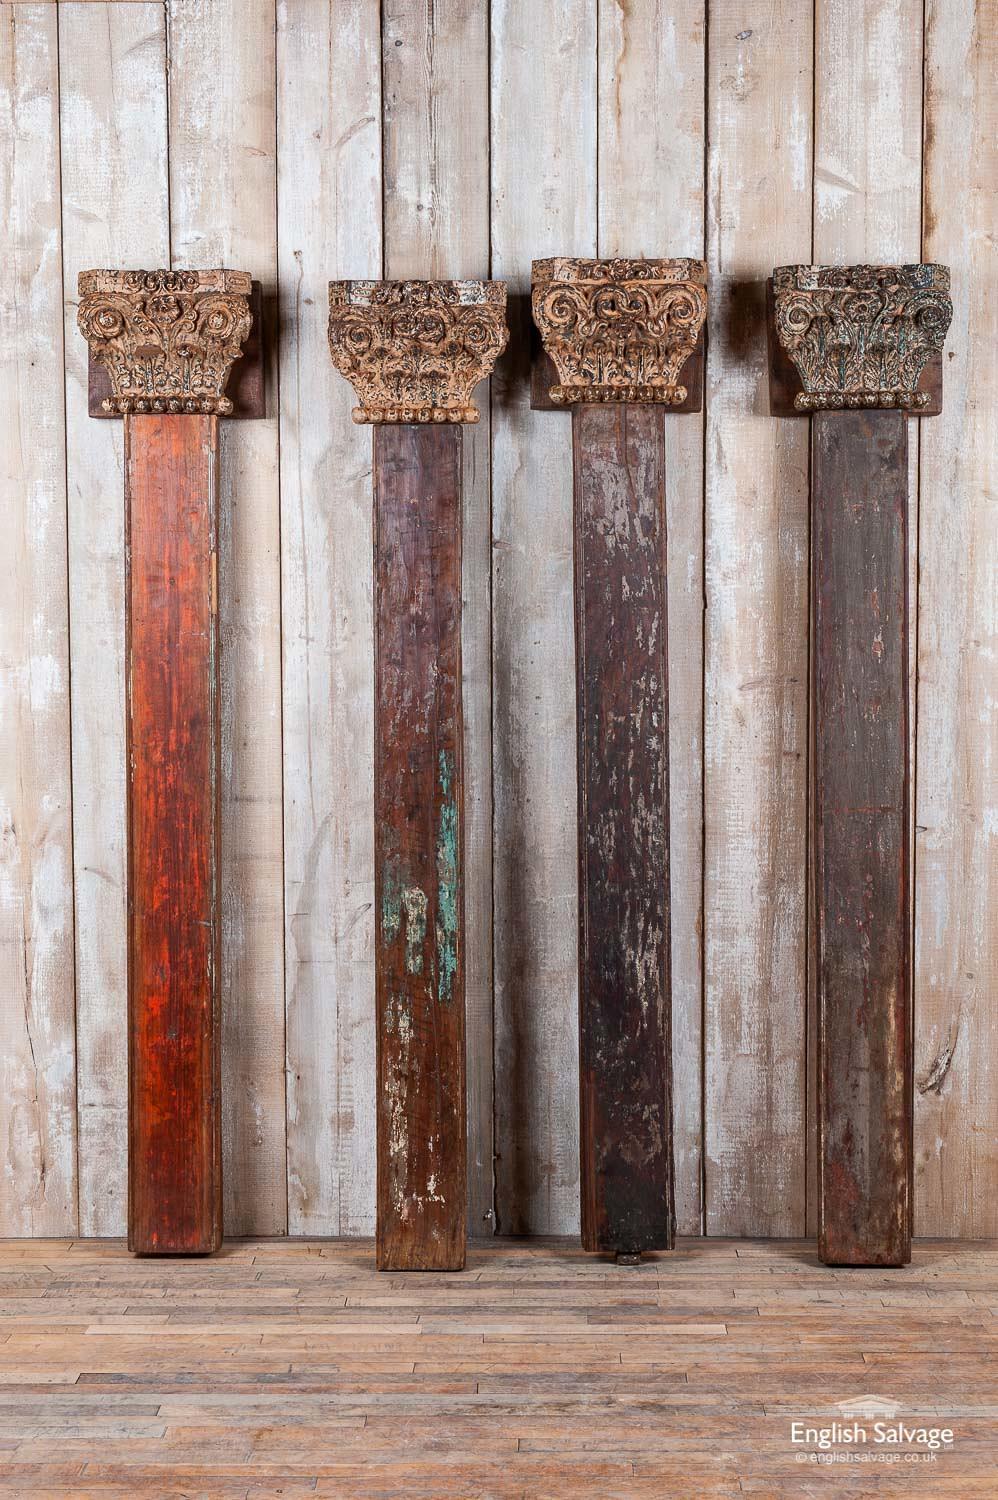 A set of four antique rectangular columns in teak with beautifully hand carved decorative capitals featuring acanthus leaves, scrolls and flowers and a ball edging. One of the capitals is slightly different from the others, though it is clearly part